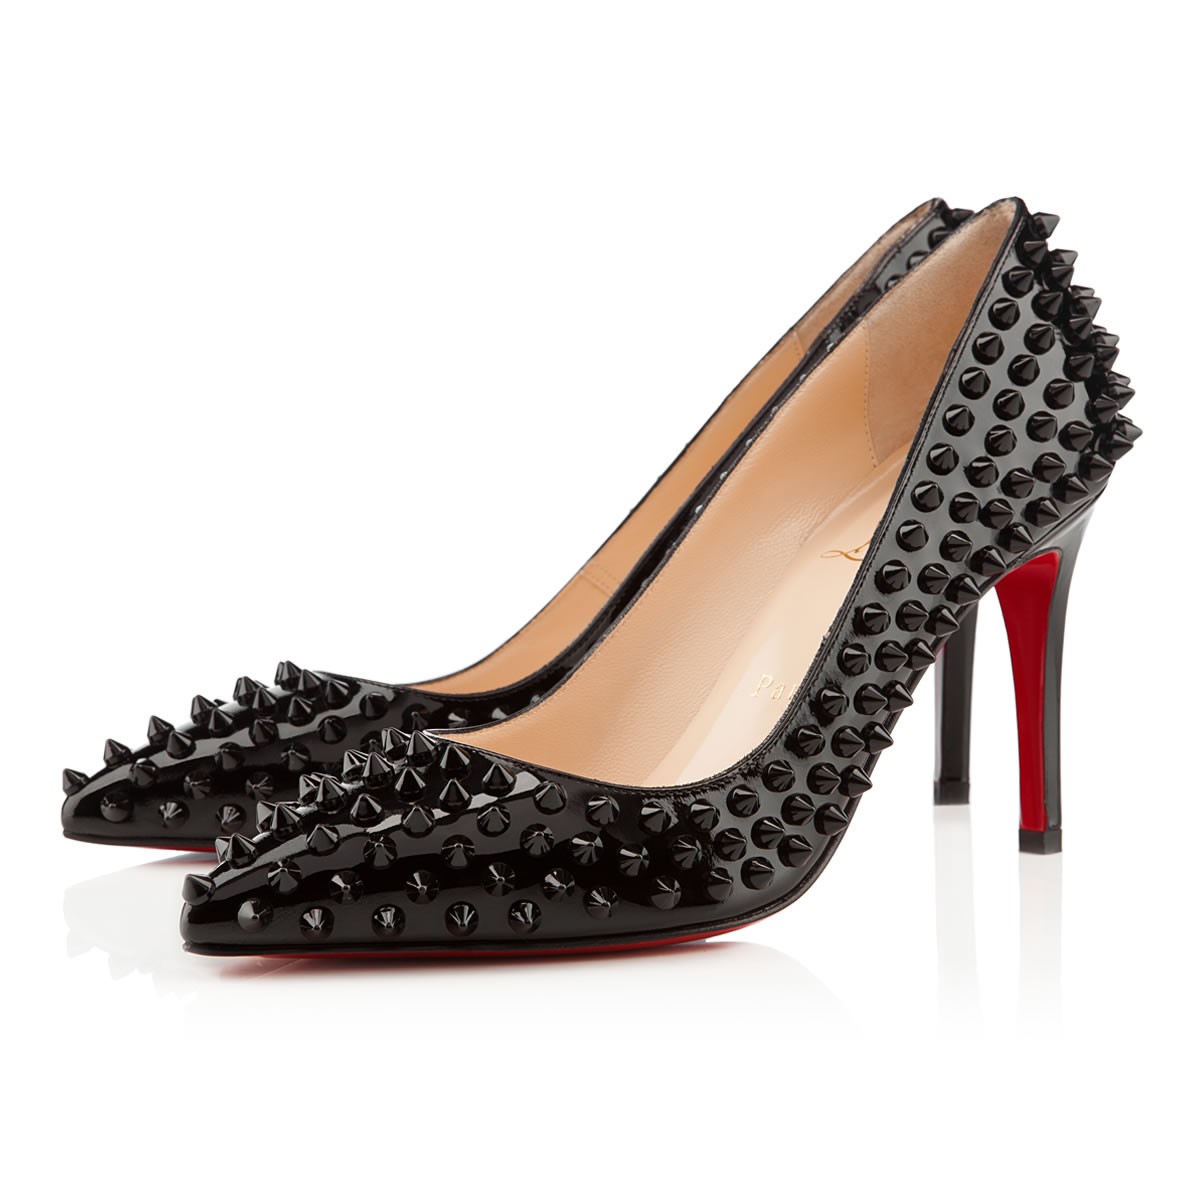 spikes louboutin for shoes  less or 9.99 pigalle christian